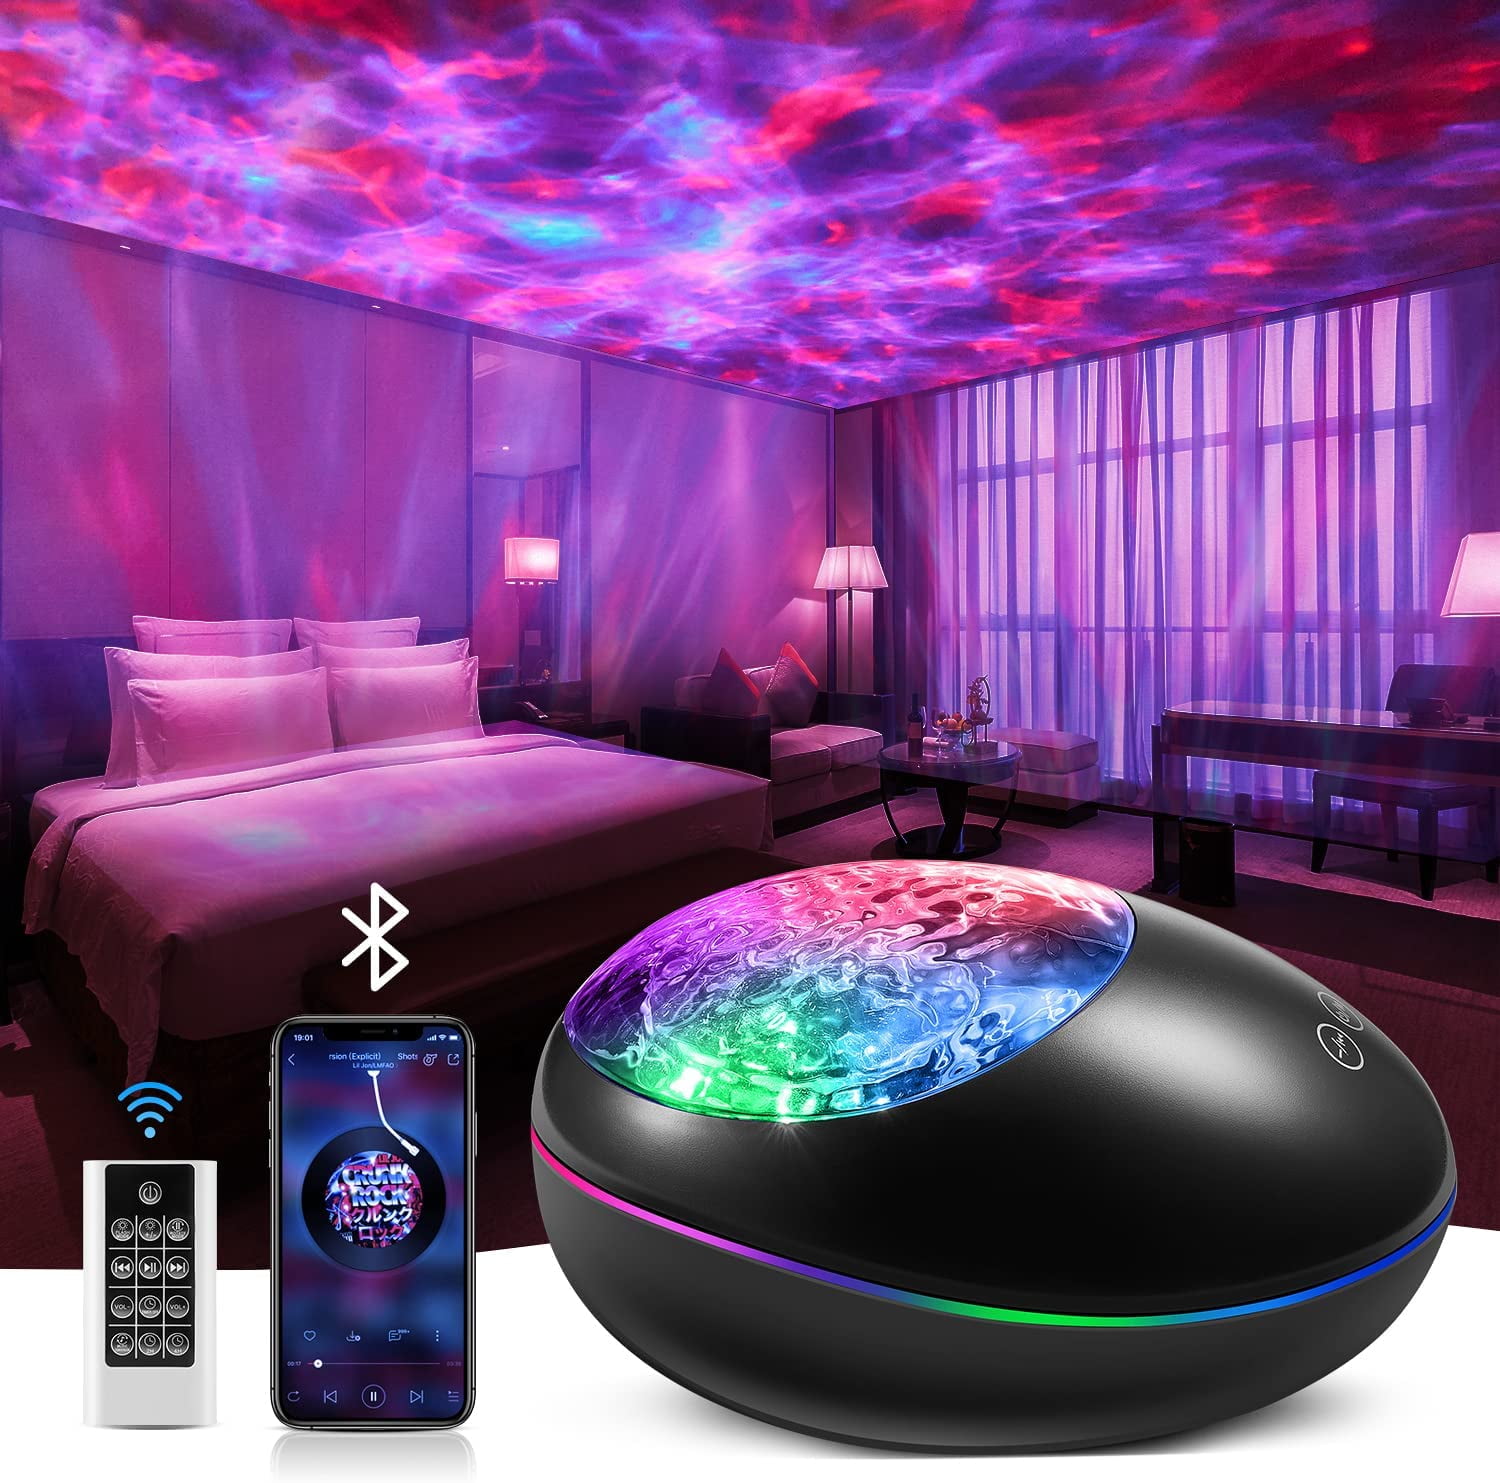 Star Projector Galaxy Light Projector for Bedroom Bluetooth Music Speaker Aurora Light Projector Ocean Wave Projector Star Projector Night Light with Remote Control for Kids Adults Party Birthday Gift 